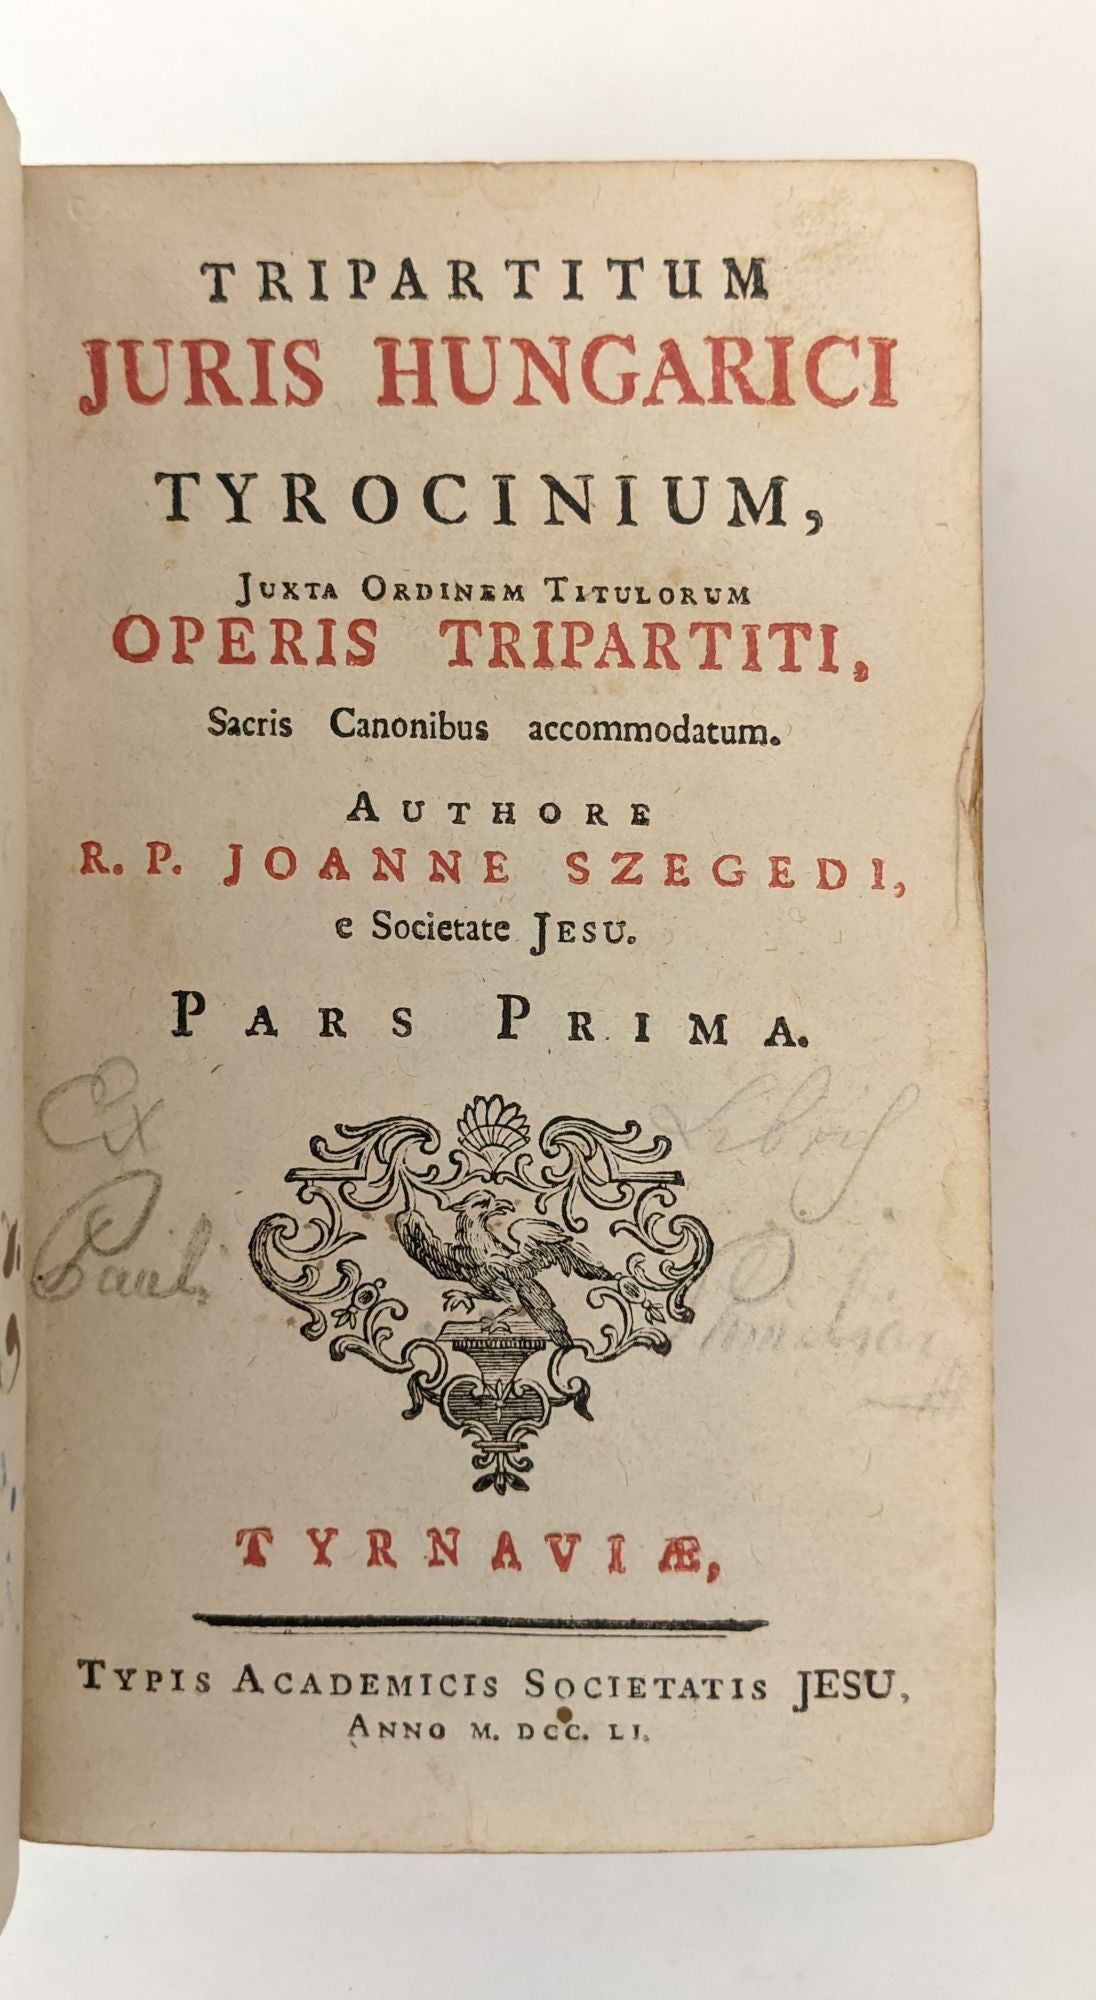 Product Image for Tripartitum Juris Hungarici Tyrocinium [Volume One Only]